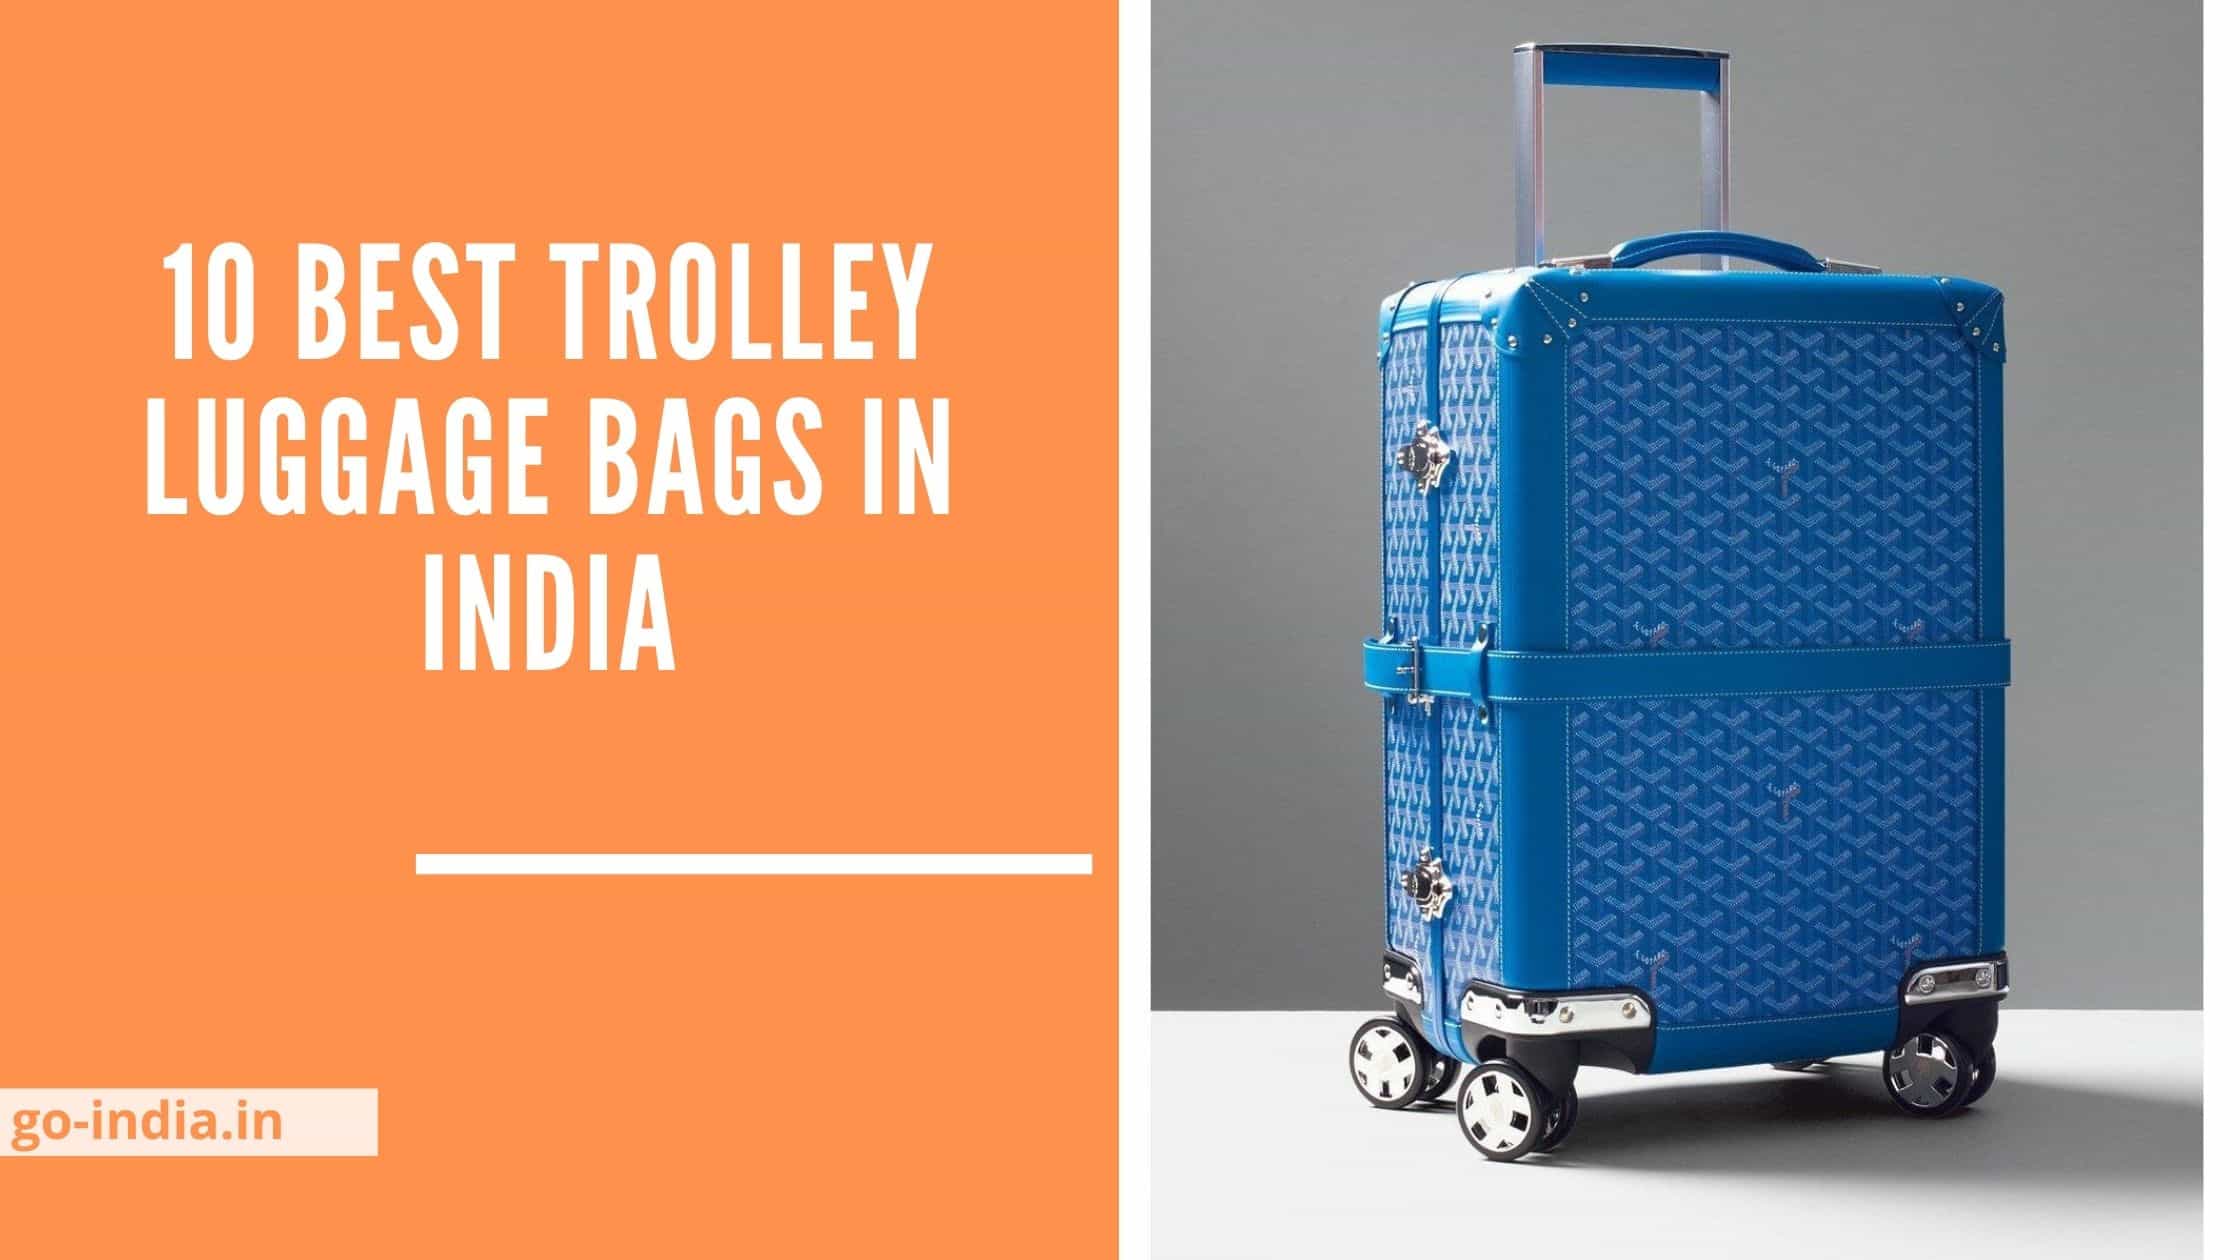 10 Best Trolley Luggage Bags in India 2022 – Reviews & Buying Guide